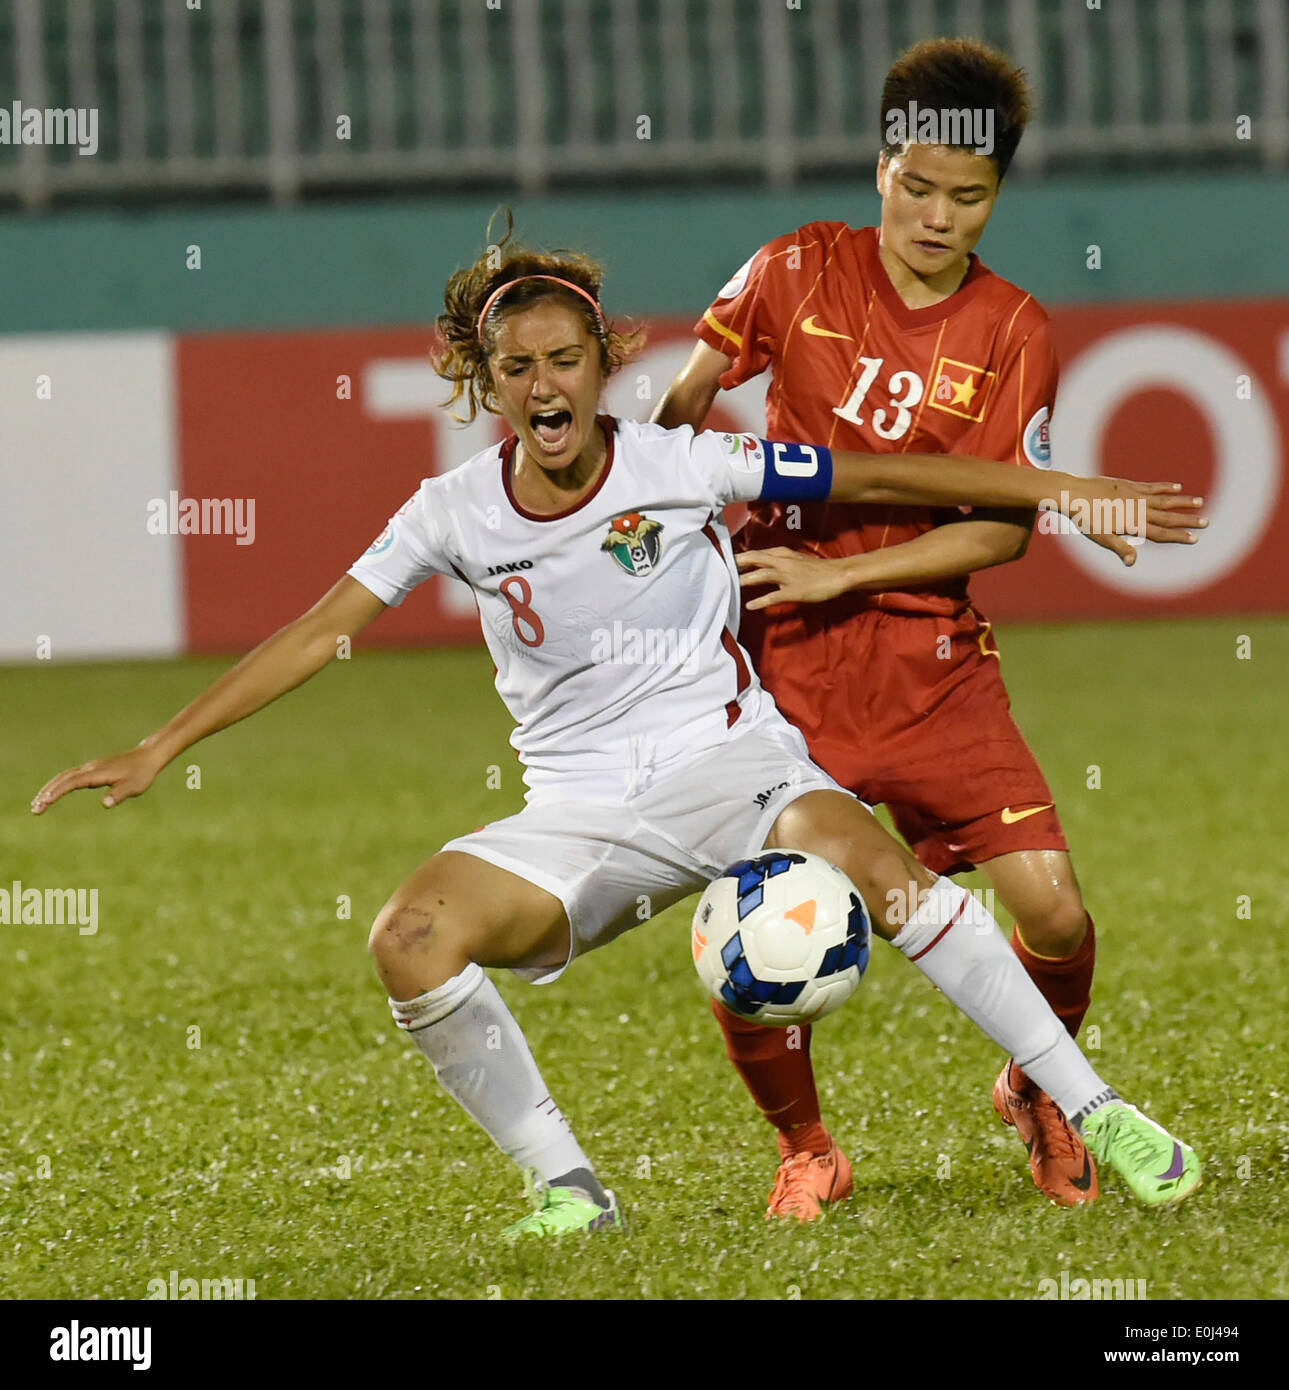 Ho Chi Minh City, Vietnam. 14th May, 2014. Vietnam's Nguyen Thi Lieu (R) vies with Jordan's Stephanie Mazen Yousef Alnaber during their Group A match at the 2014 AFC Women's Asian Cup held at Thong Nhat Stadium in Ho Chi Minh city, Vietnam, May 14, 2014. Vietnam beat Jordan 3-1. © He Jingjia/Xinhua/Alamy Live News Stock Photo